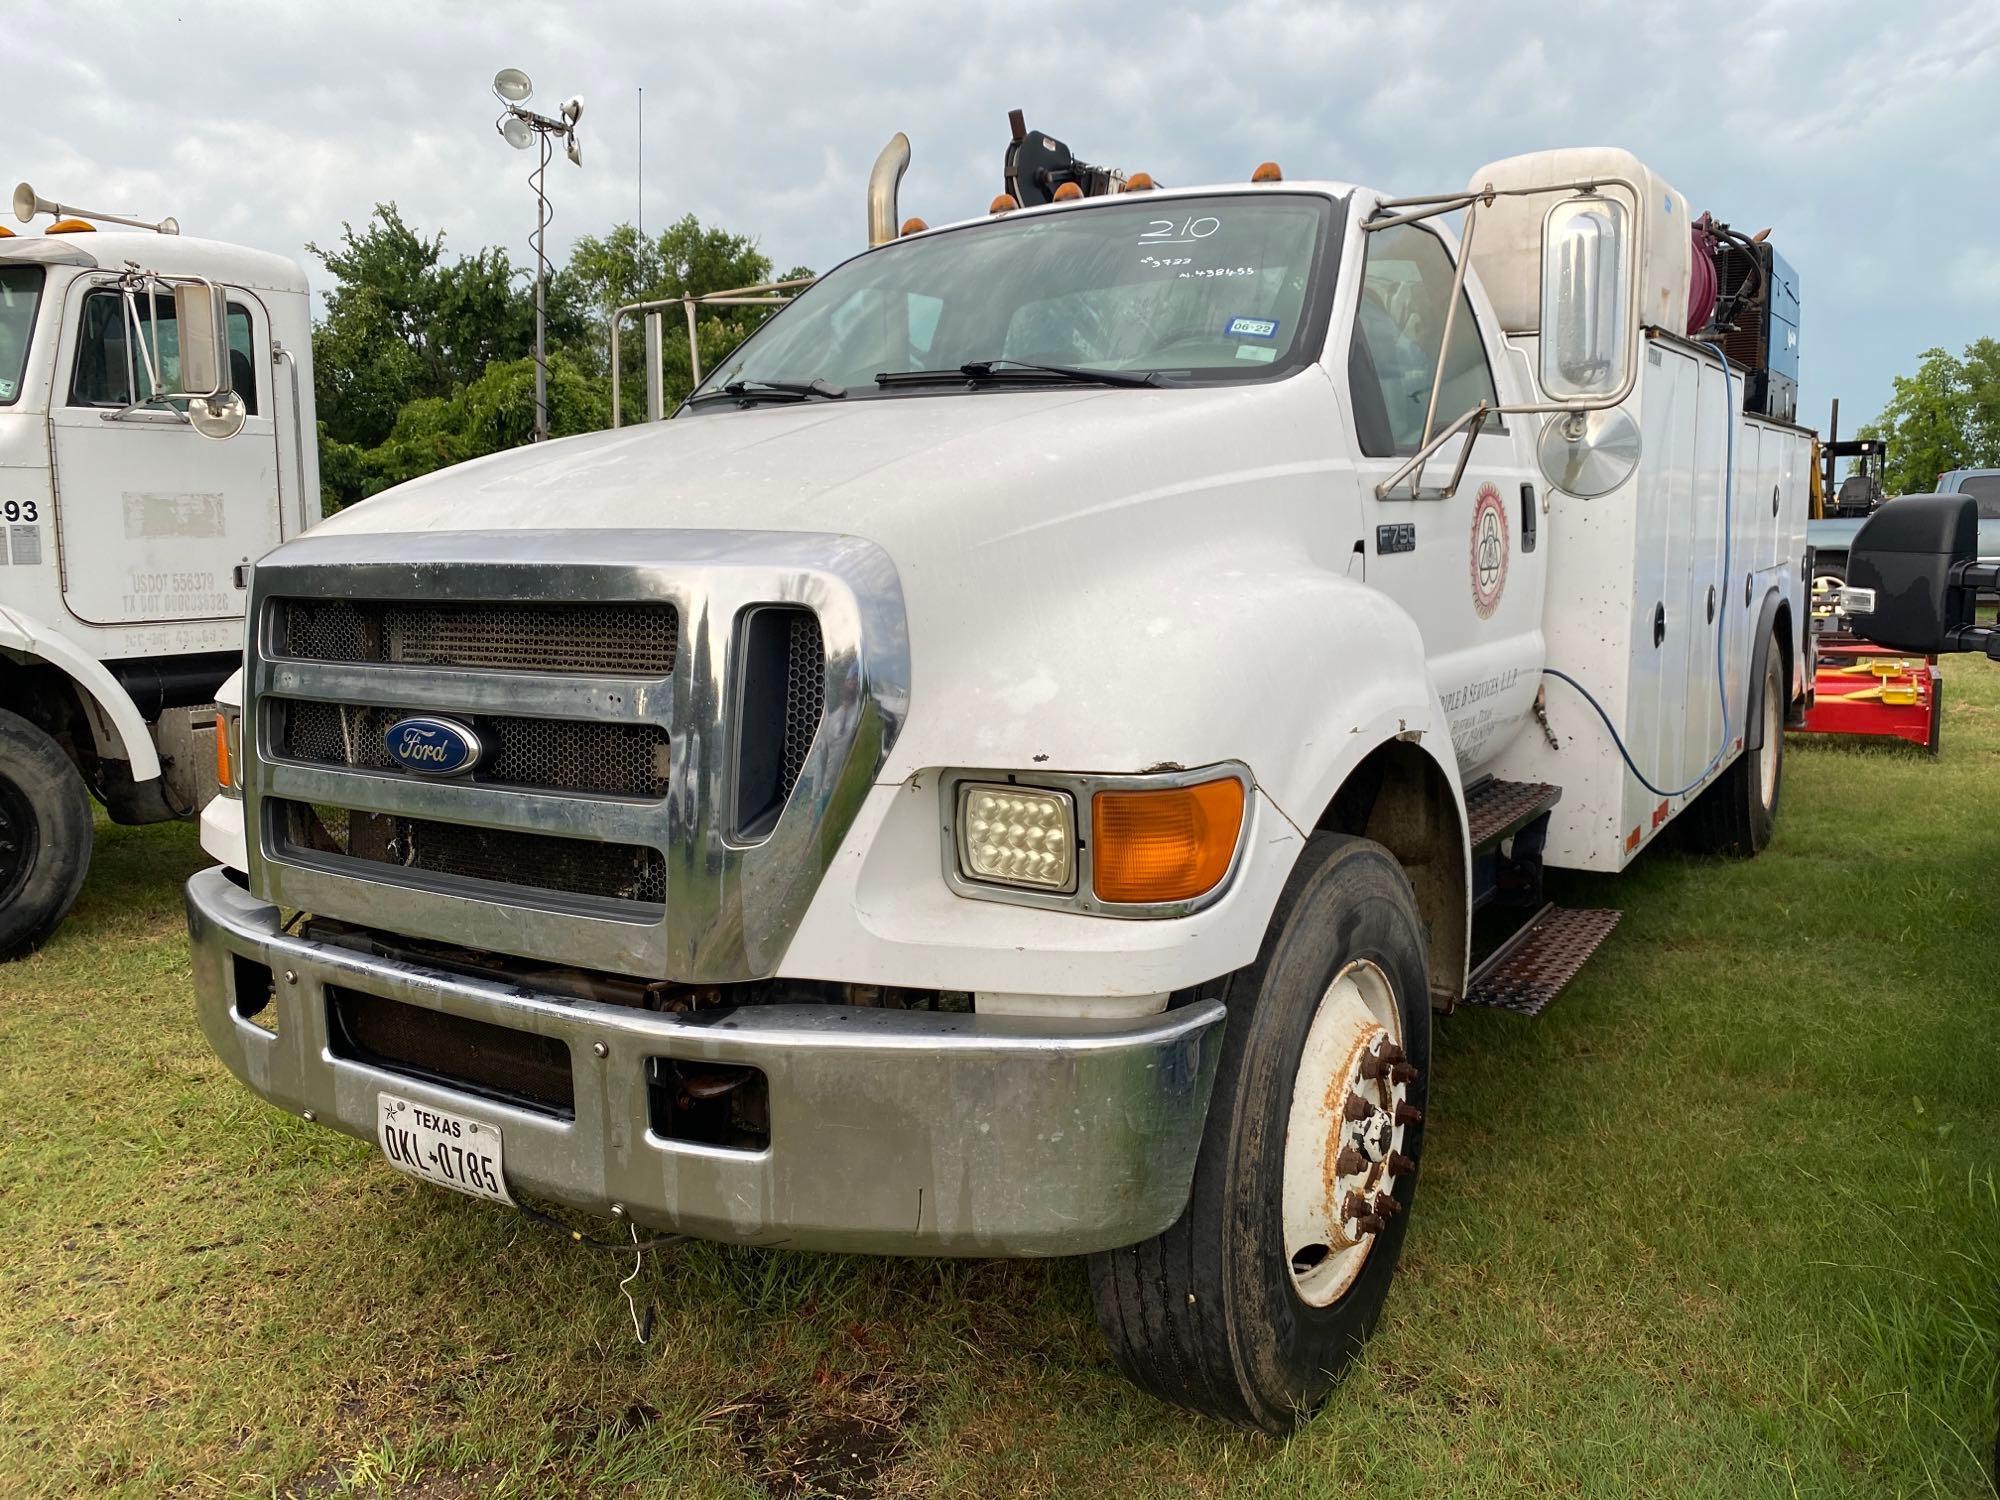 2007 FORD F750 SERVICE TRUCK VN:443733 powered by Ford diesel engine, equipped with 7 speed